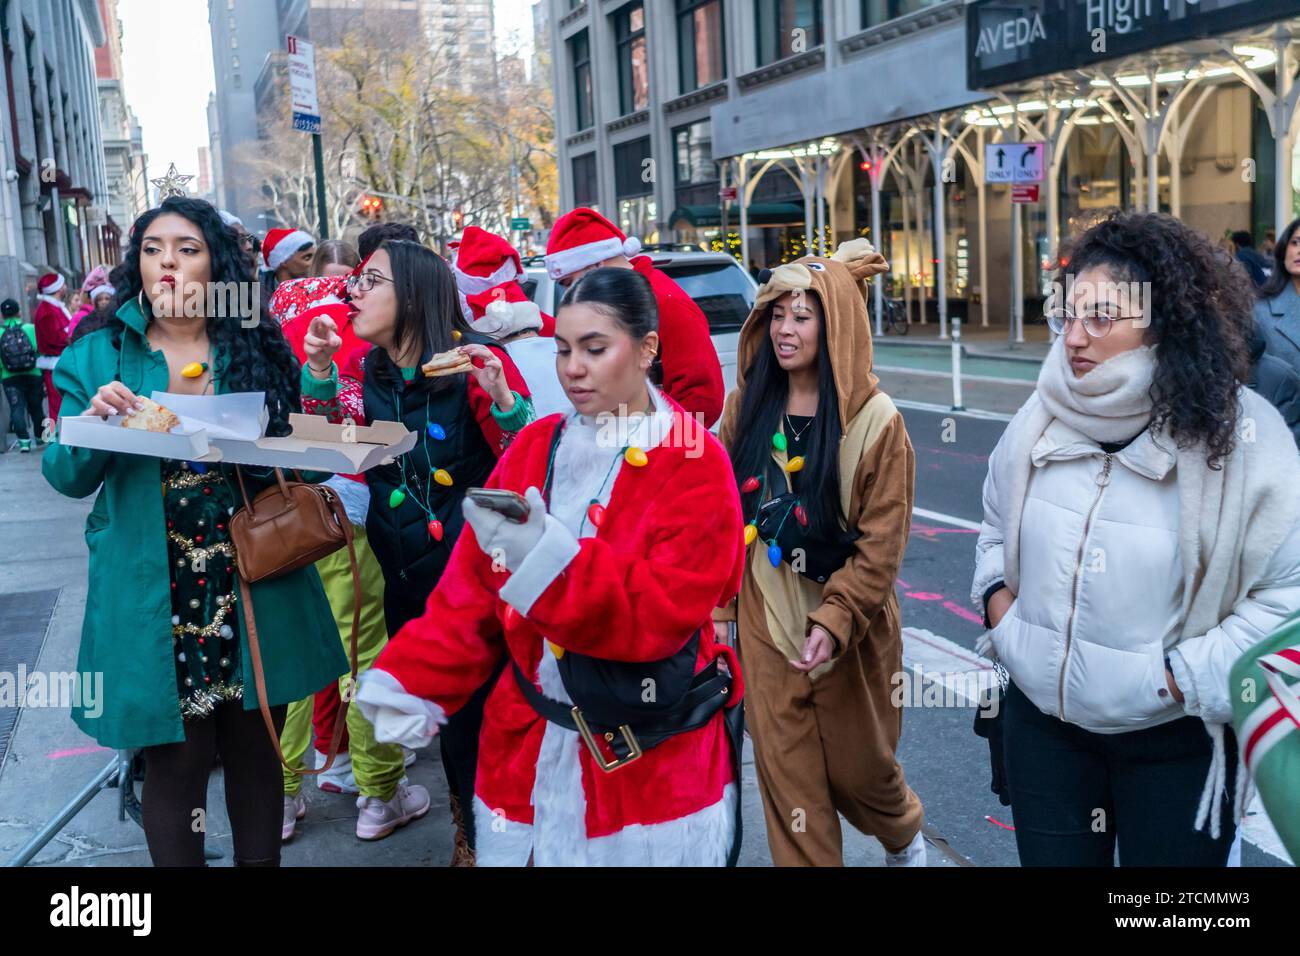 Hundreds of Santas, accompanied by their helpers and some naughty elves, wait on line to enter The Smith Bar in the NoMad neighborhood in Manhattan in New York during the annual bar crawl, SantaCon on Saturday, December 19, 2023.  SantaCon, primarily a bar crawl in Santa and other Christmas related costumes, attracts masqueraders going from bar to bar.  (© Richard B. Levine) Stock Photo